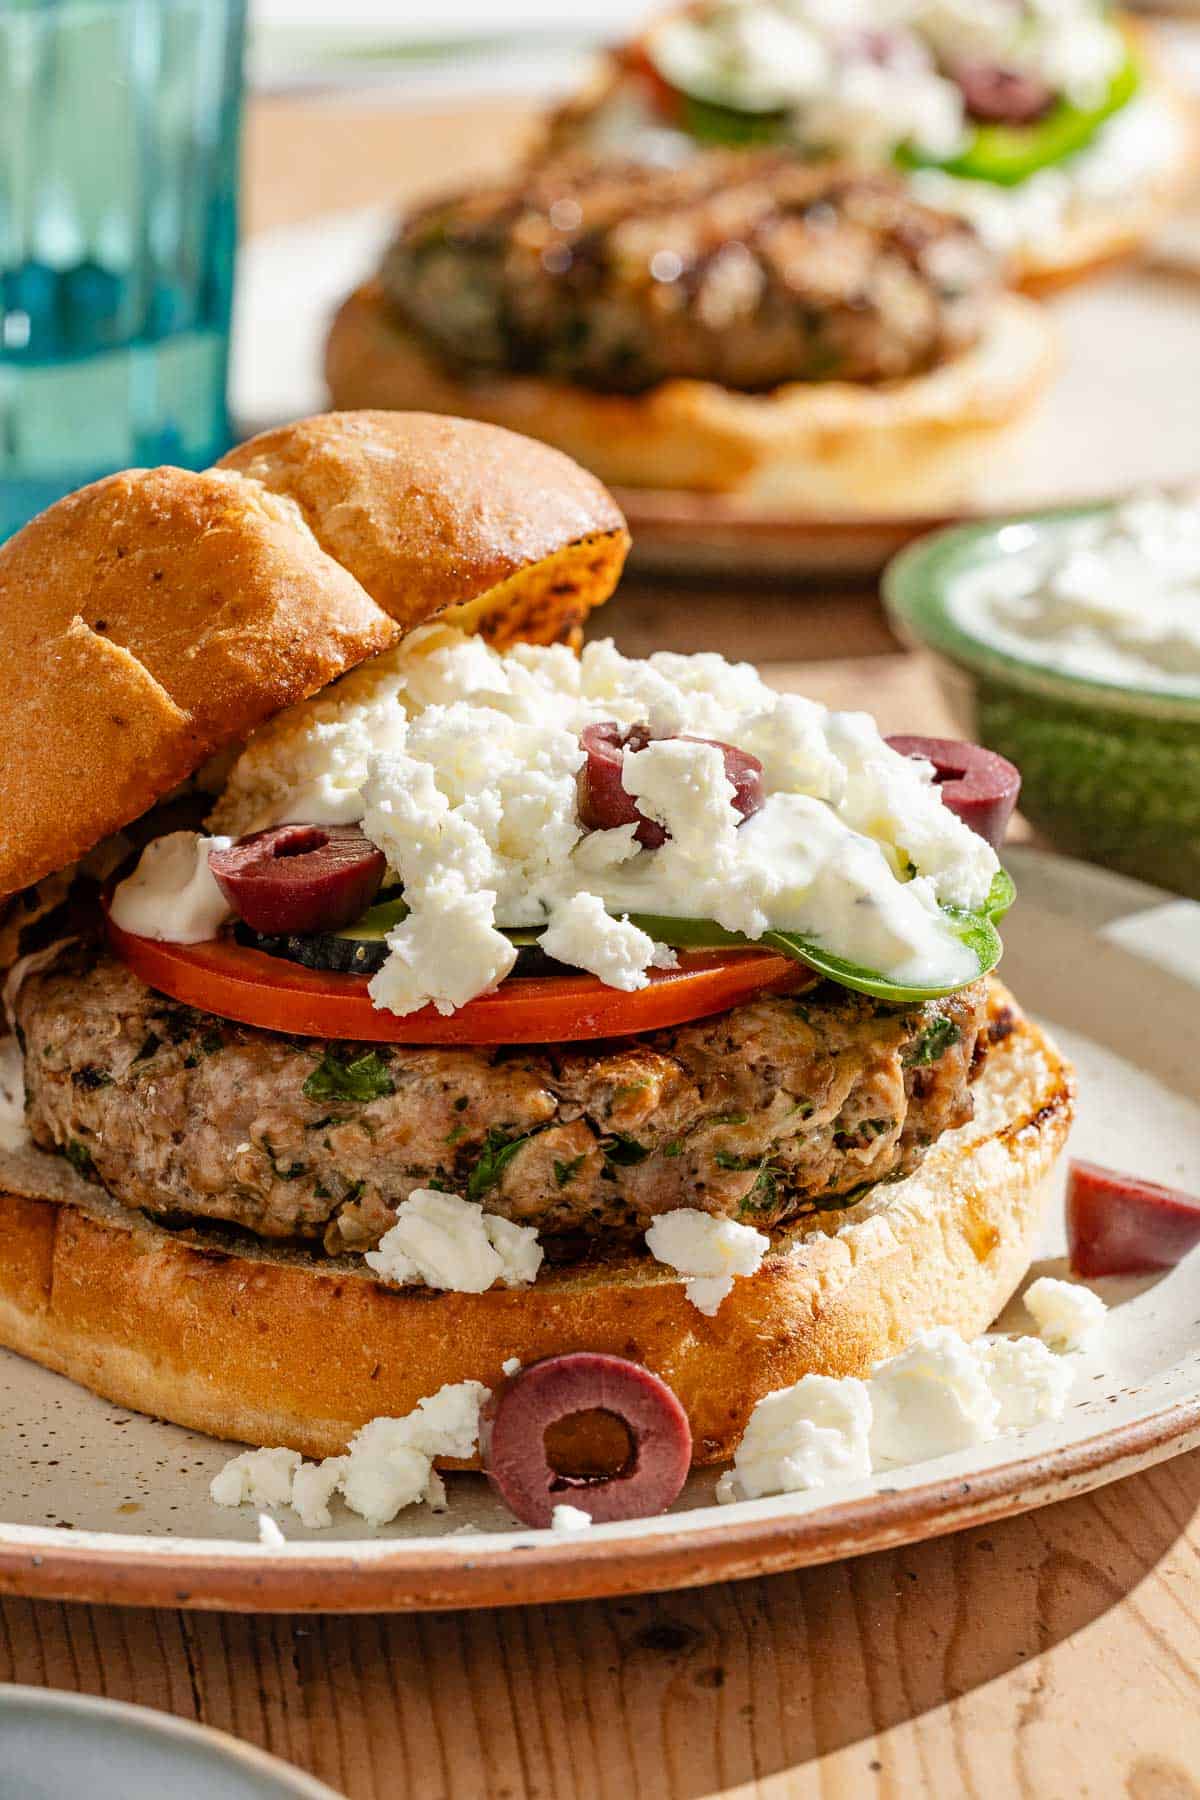 A close up of a greek style lamb burger on a plate in front of various table settings.